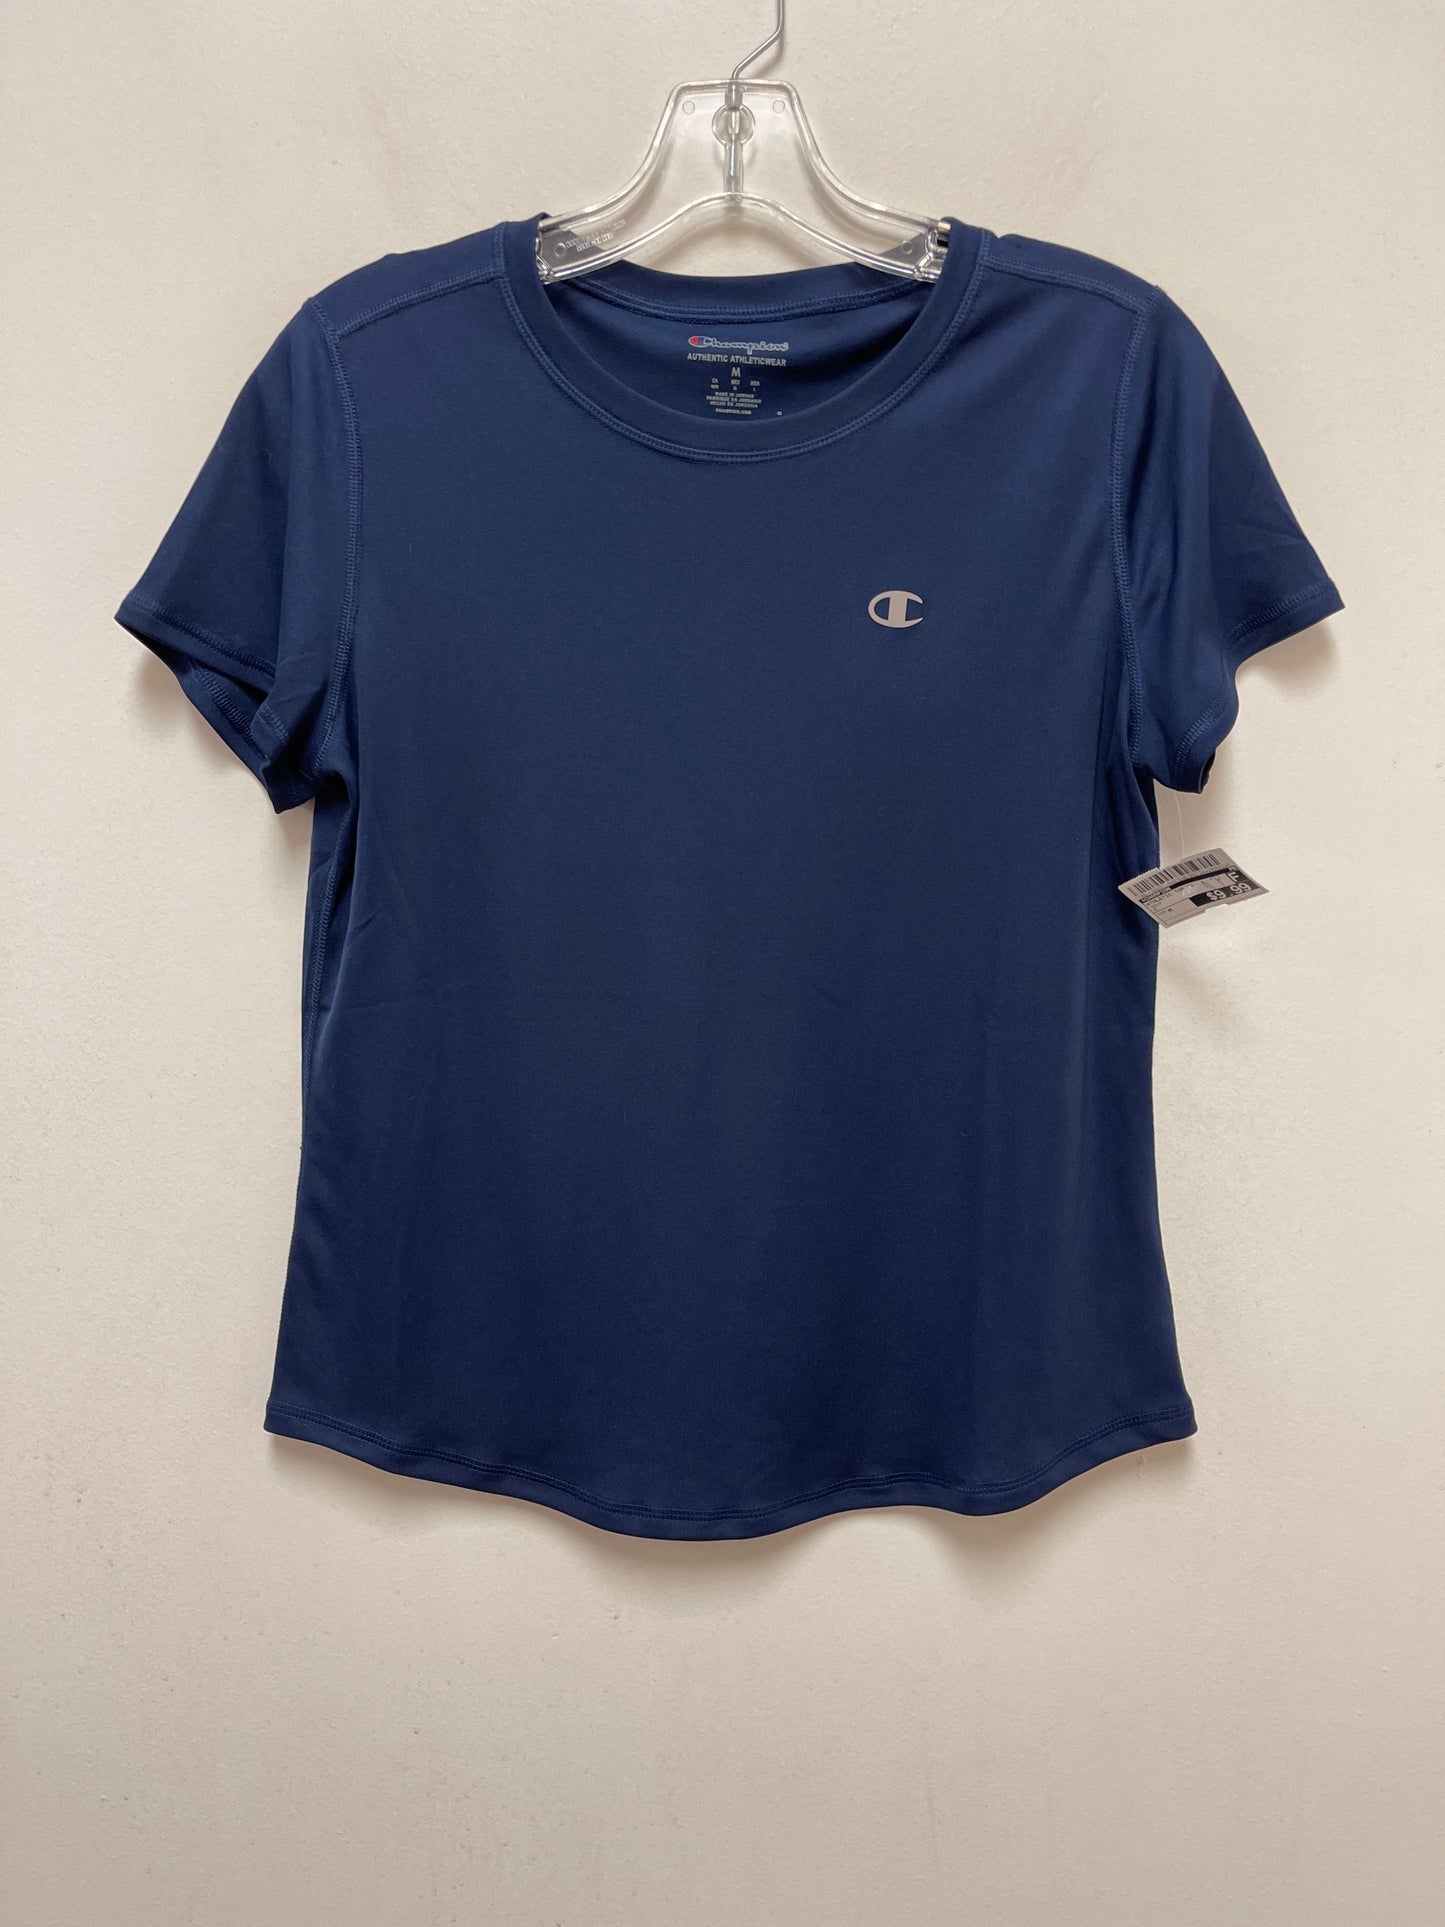 Navy Athletic Top Short Sleeve Champion, Size M